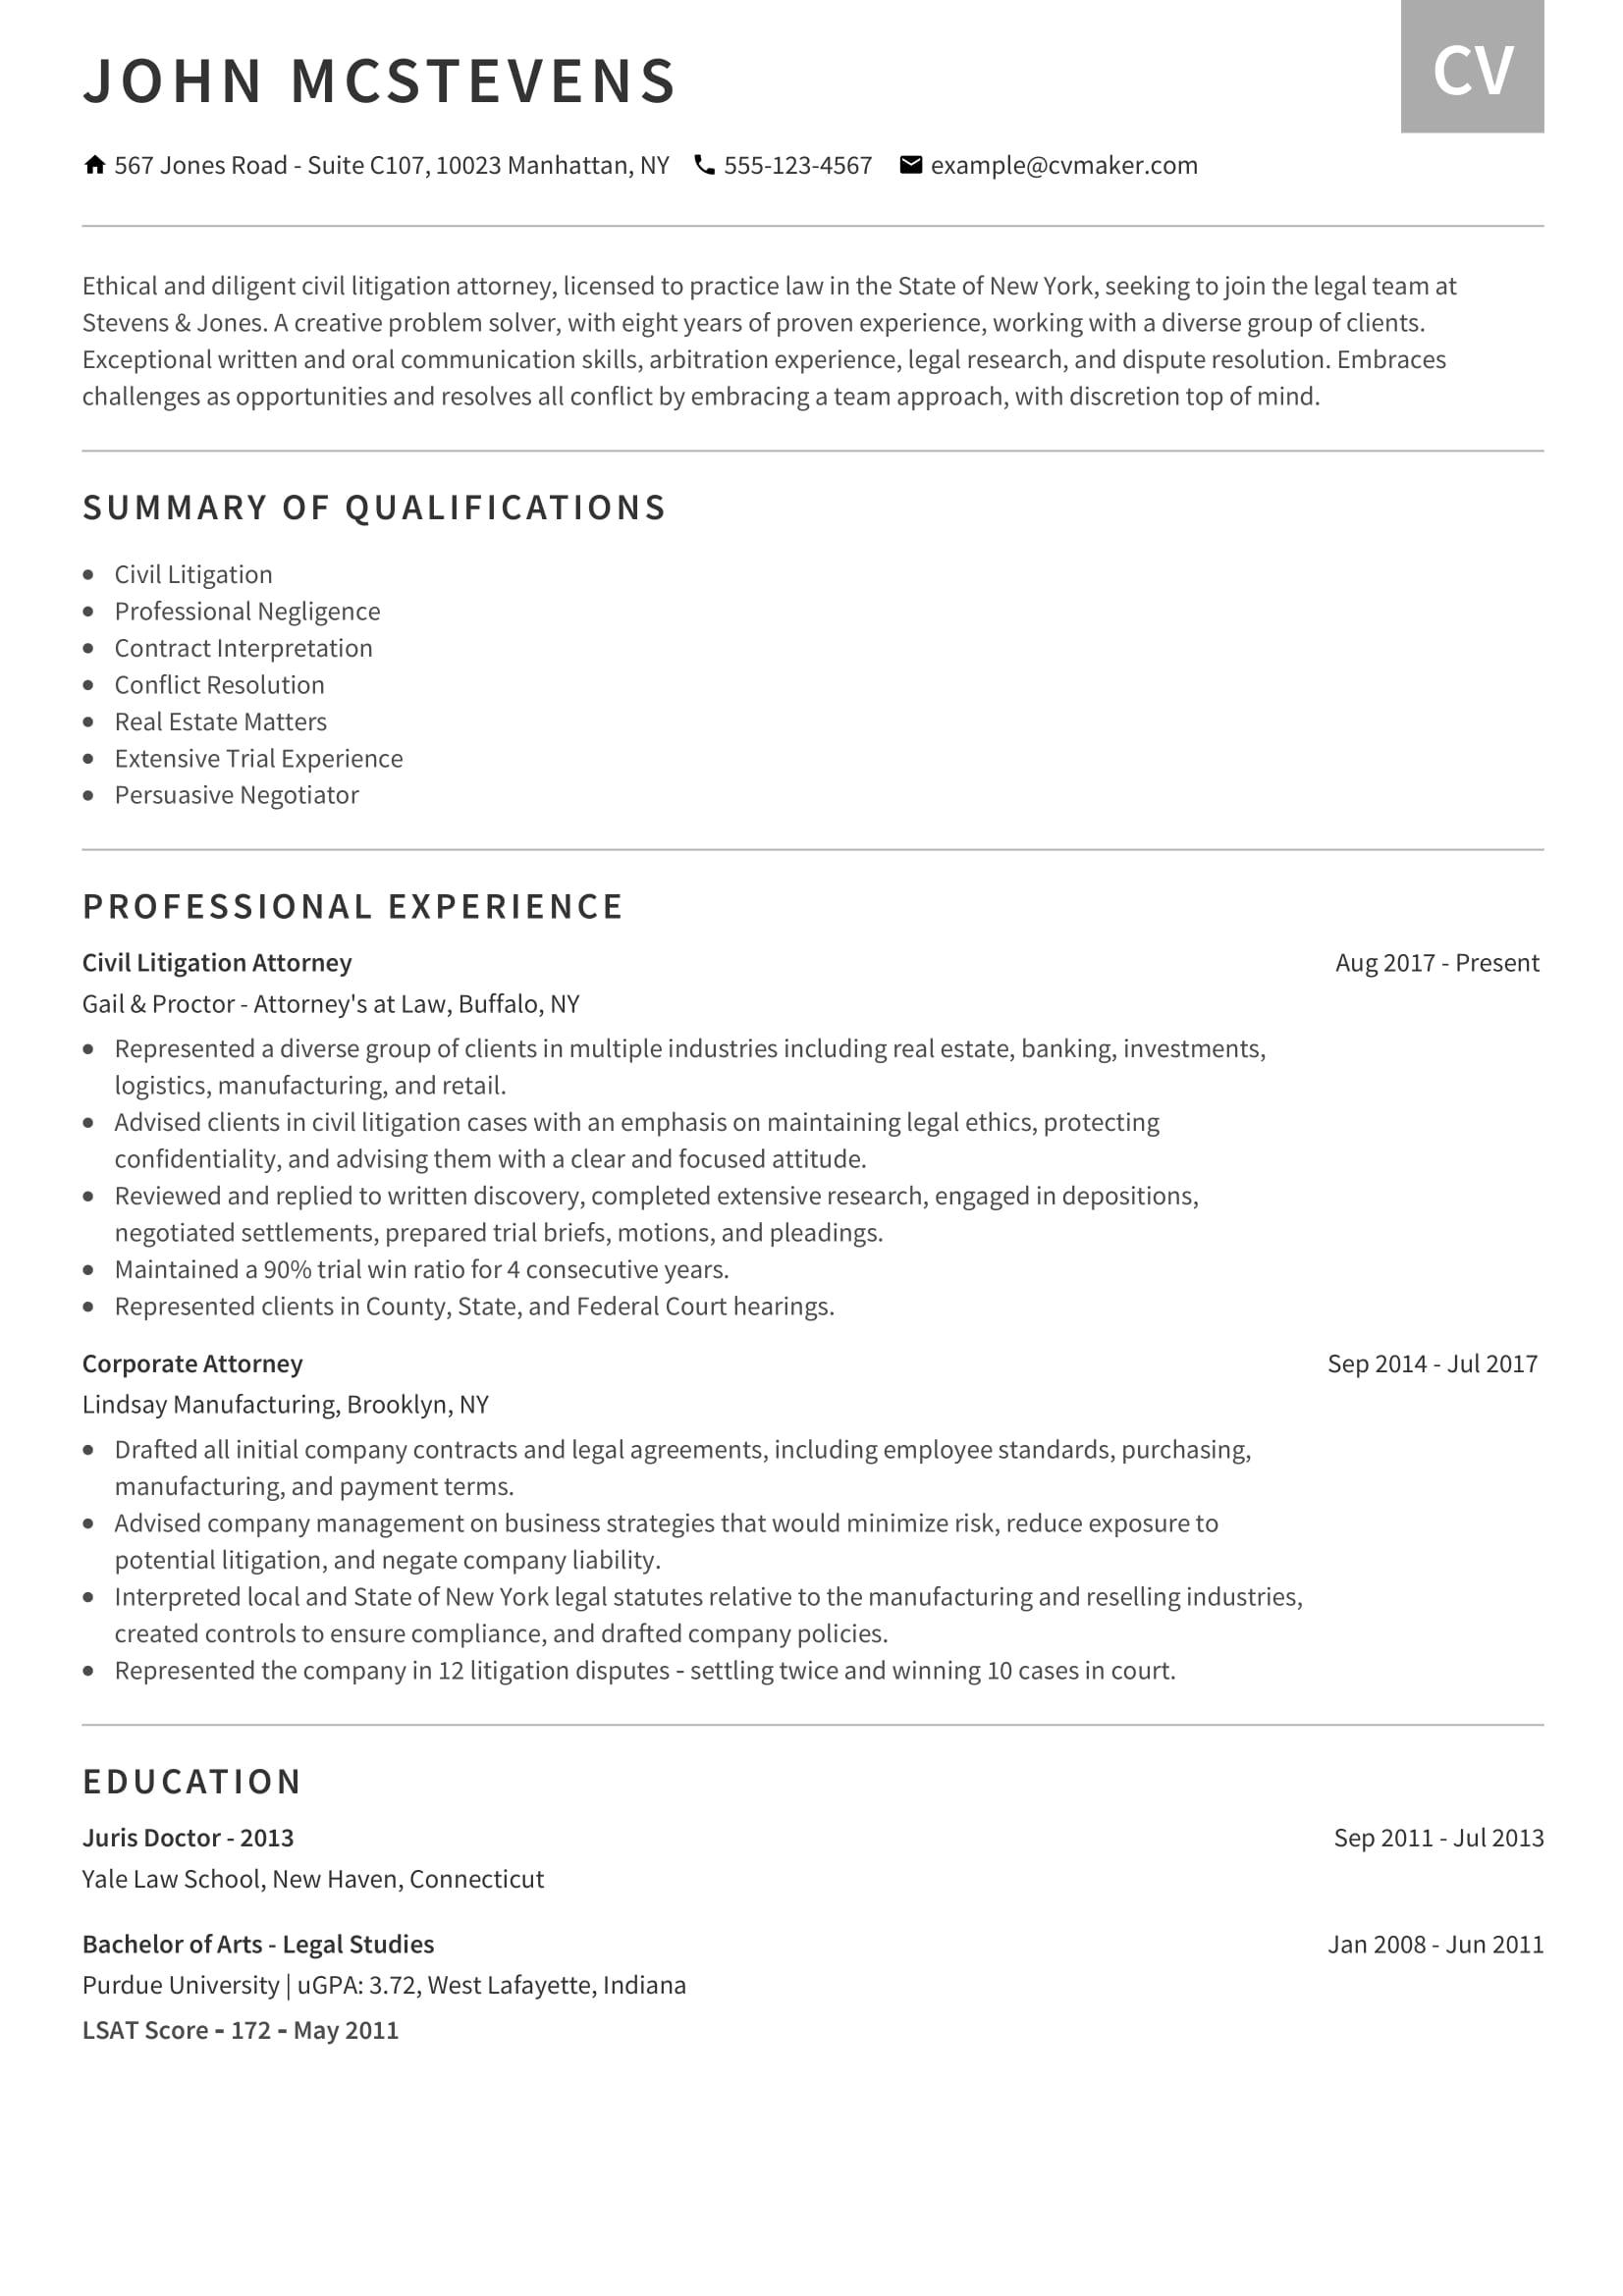 lawyer personal statement for cv